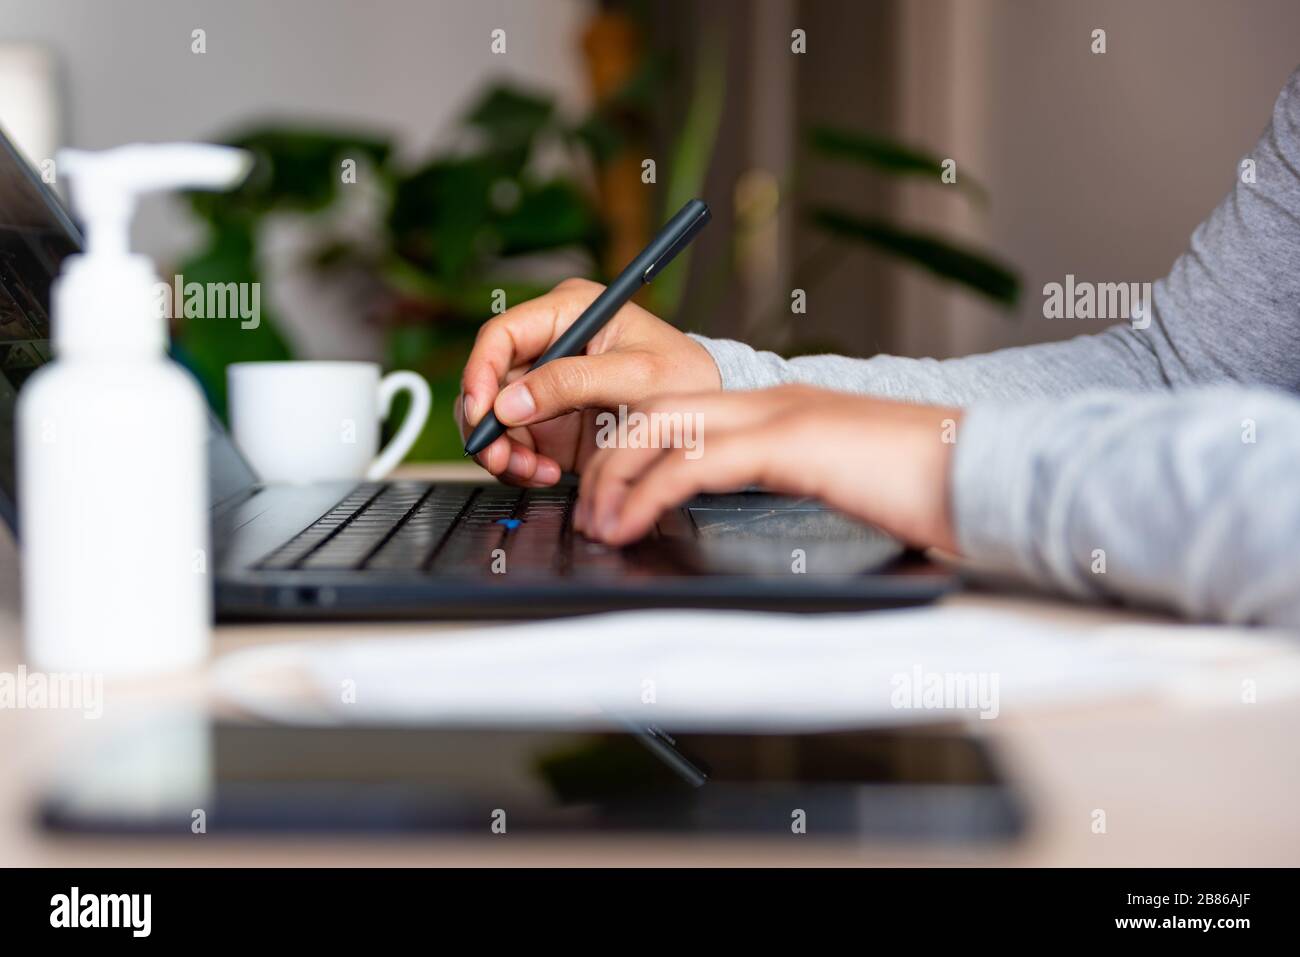 close up of hands of young woman typing on laptop keyboard with hand sanitizer while remote working due to corona virus spread Stock Photo